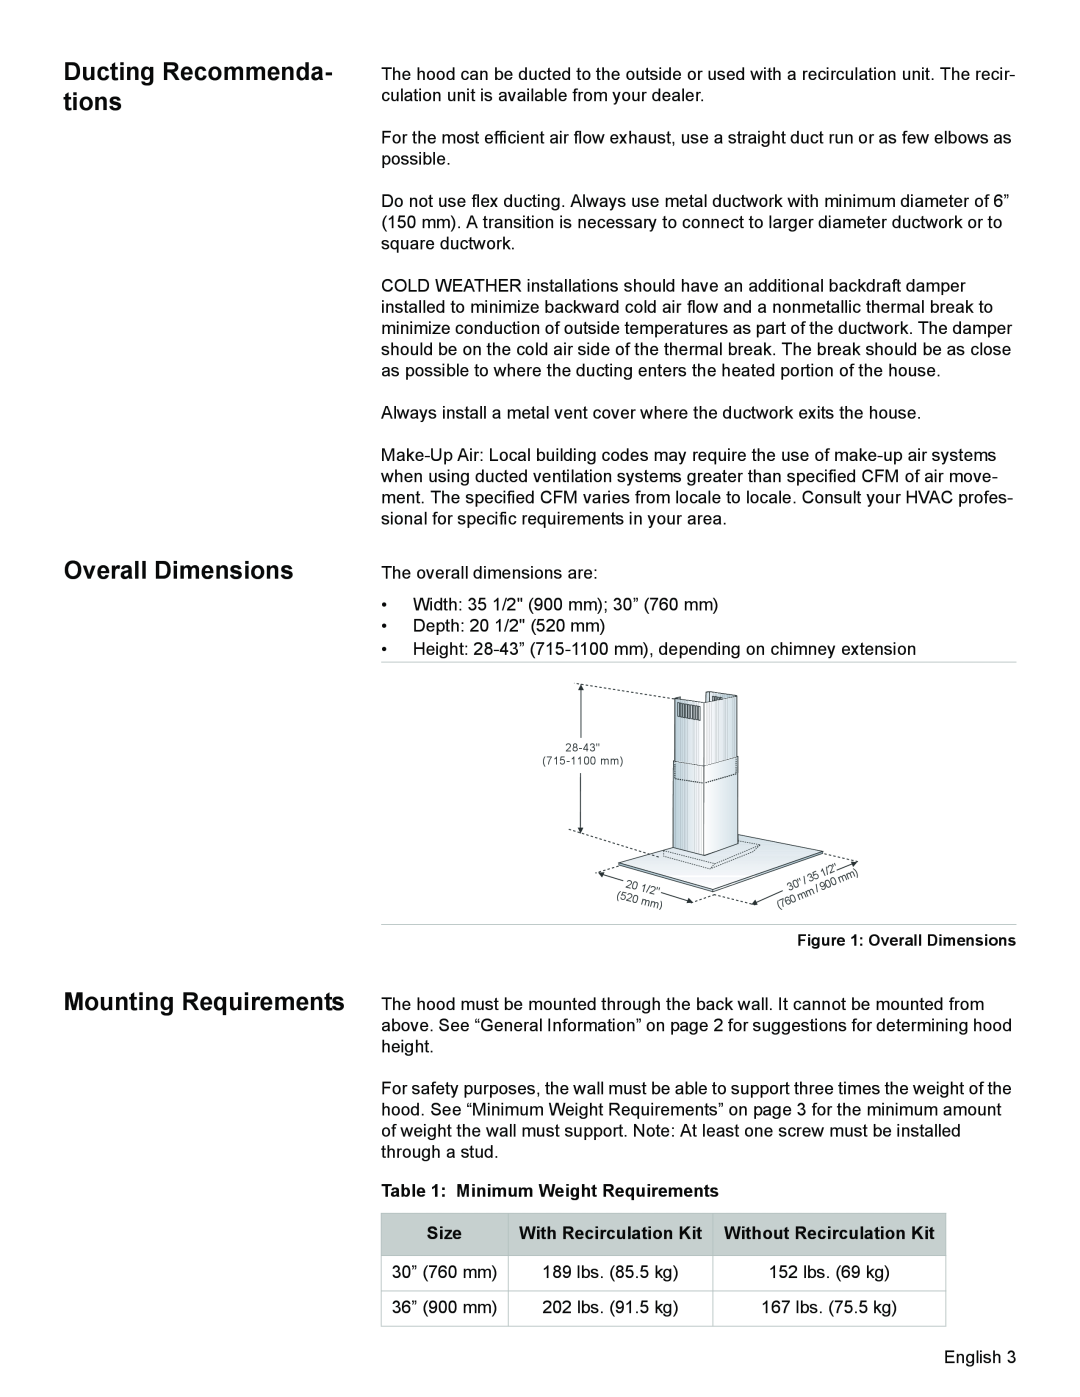 Bosch Appliances DKE96 installation manual Ducting Recommenda- tions Overall Dimensions, Minimum Weight Requirements, Size 